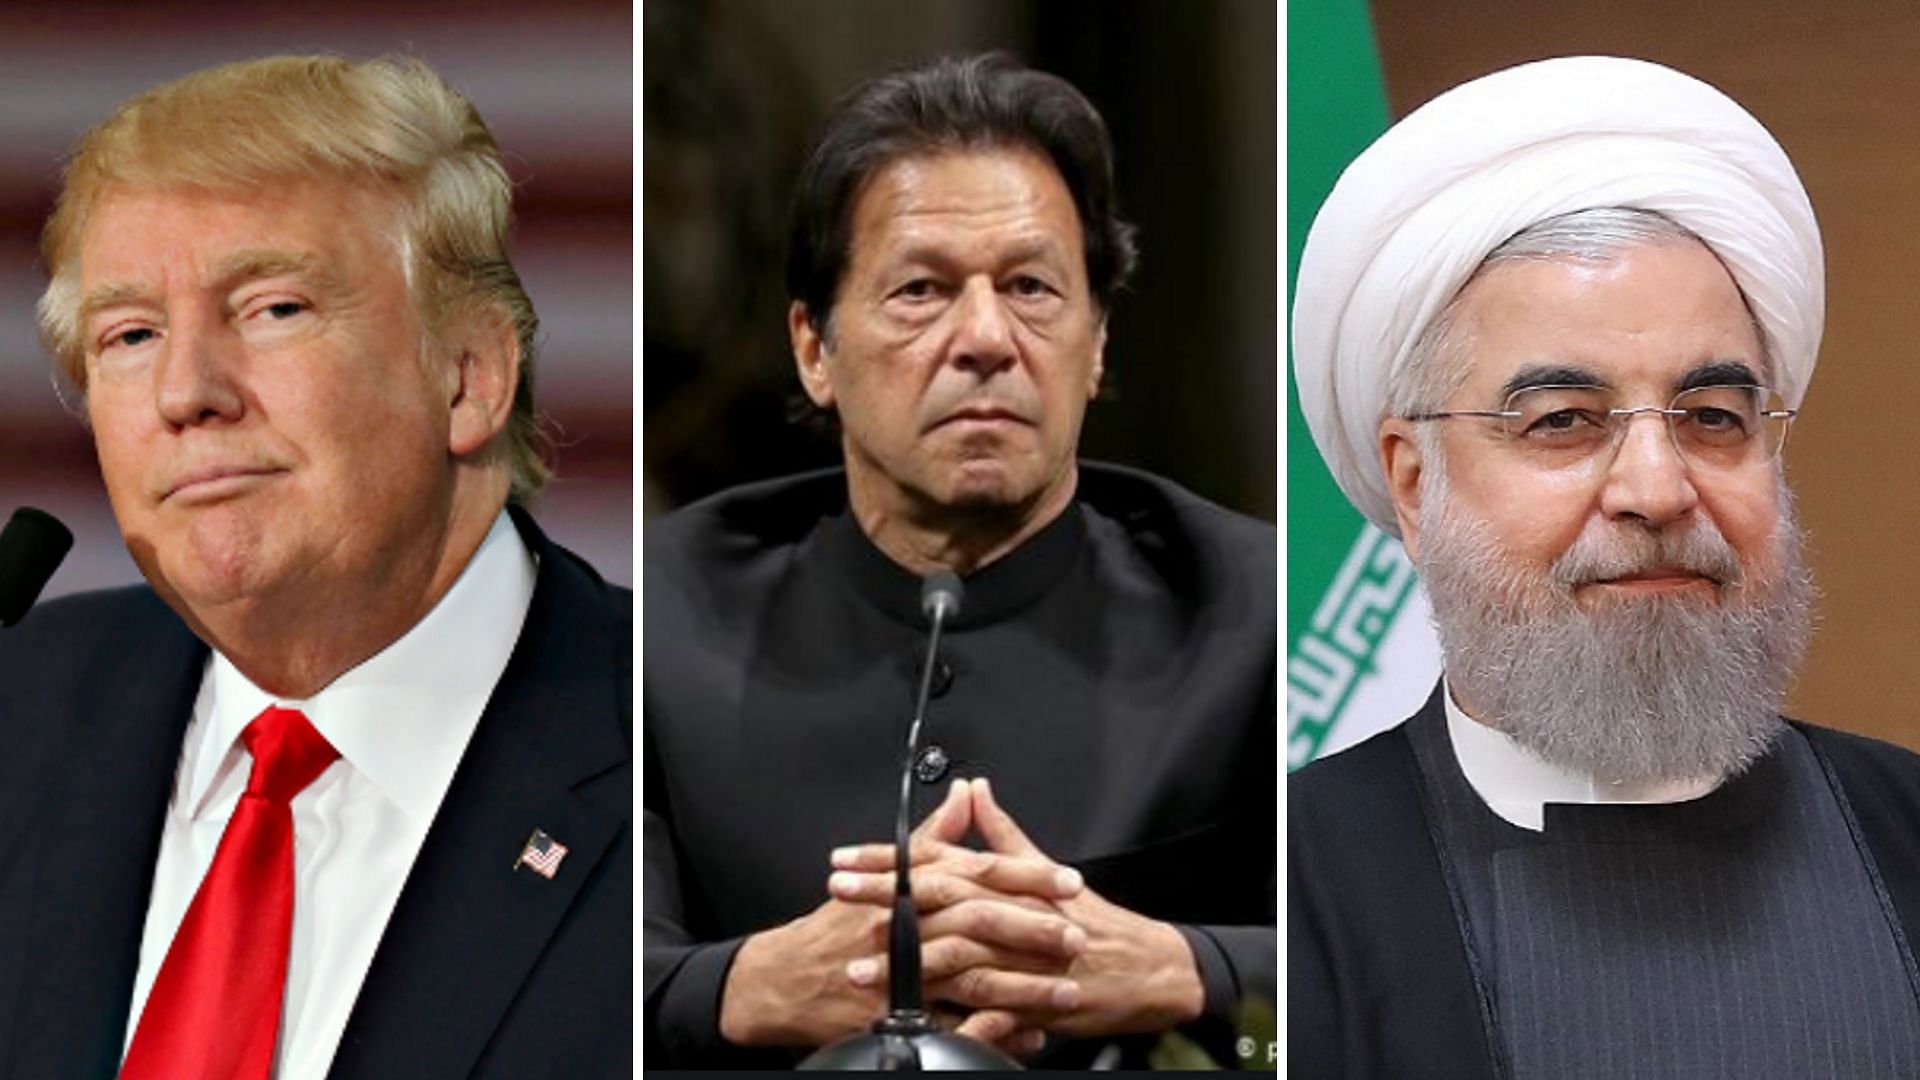 Pakistani Prime Minister Imran Khan on Tuesday, 25 September said Donald Trump had asked him to mediate with Iran to defuse tensions. 